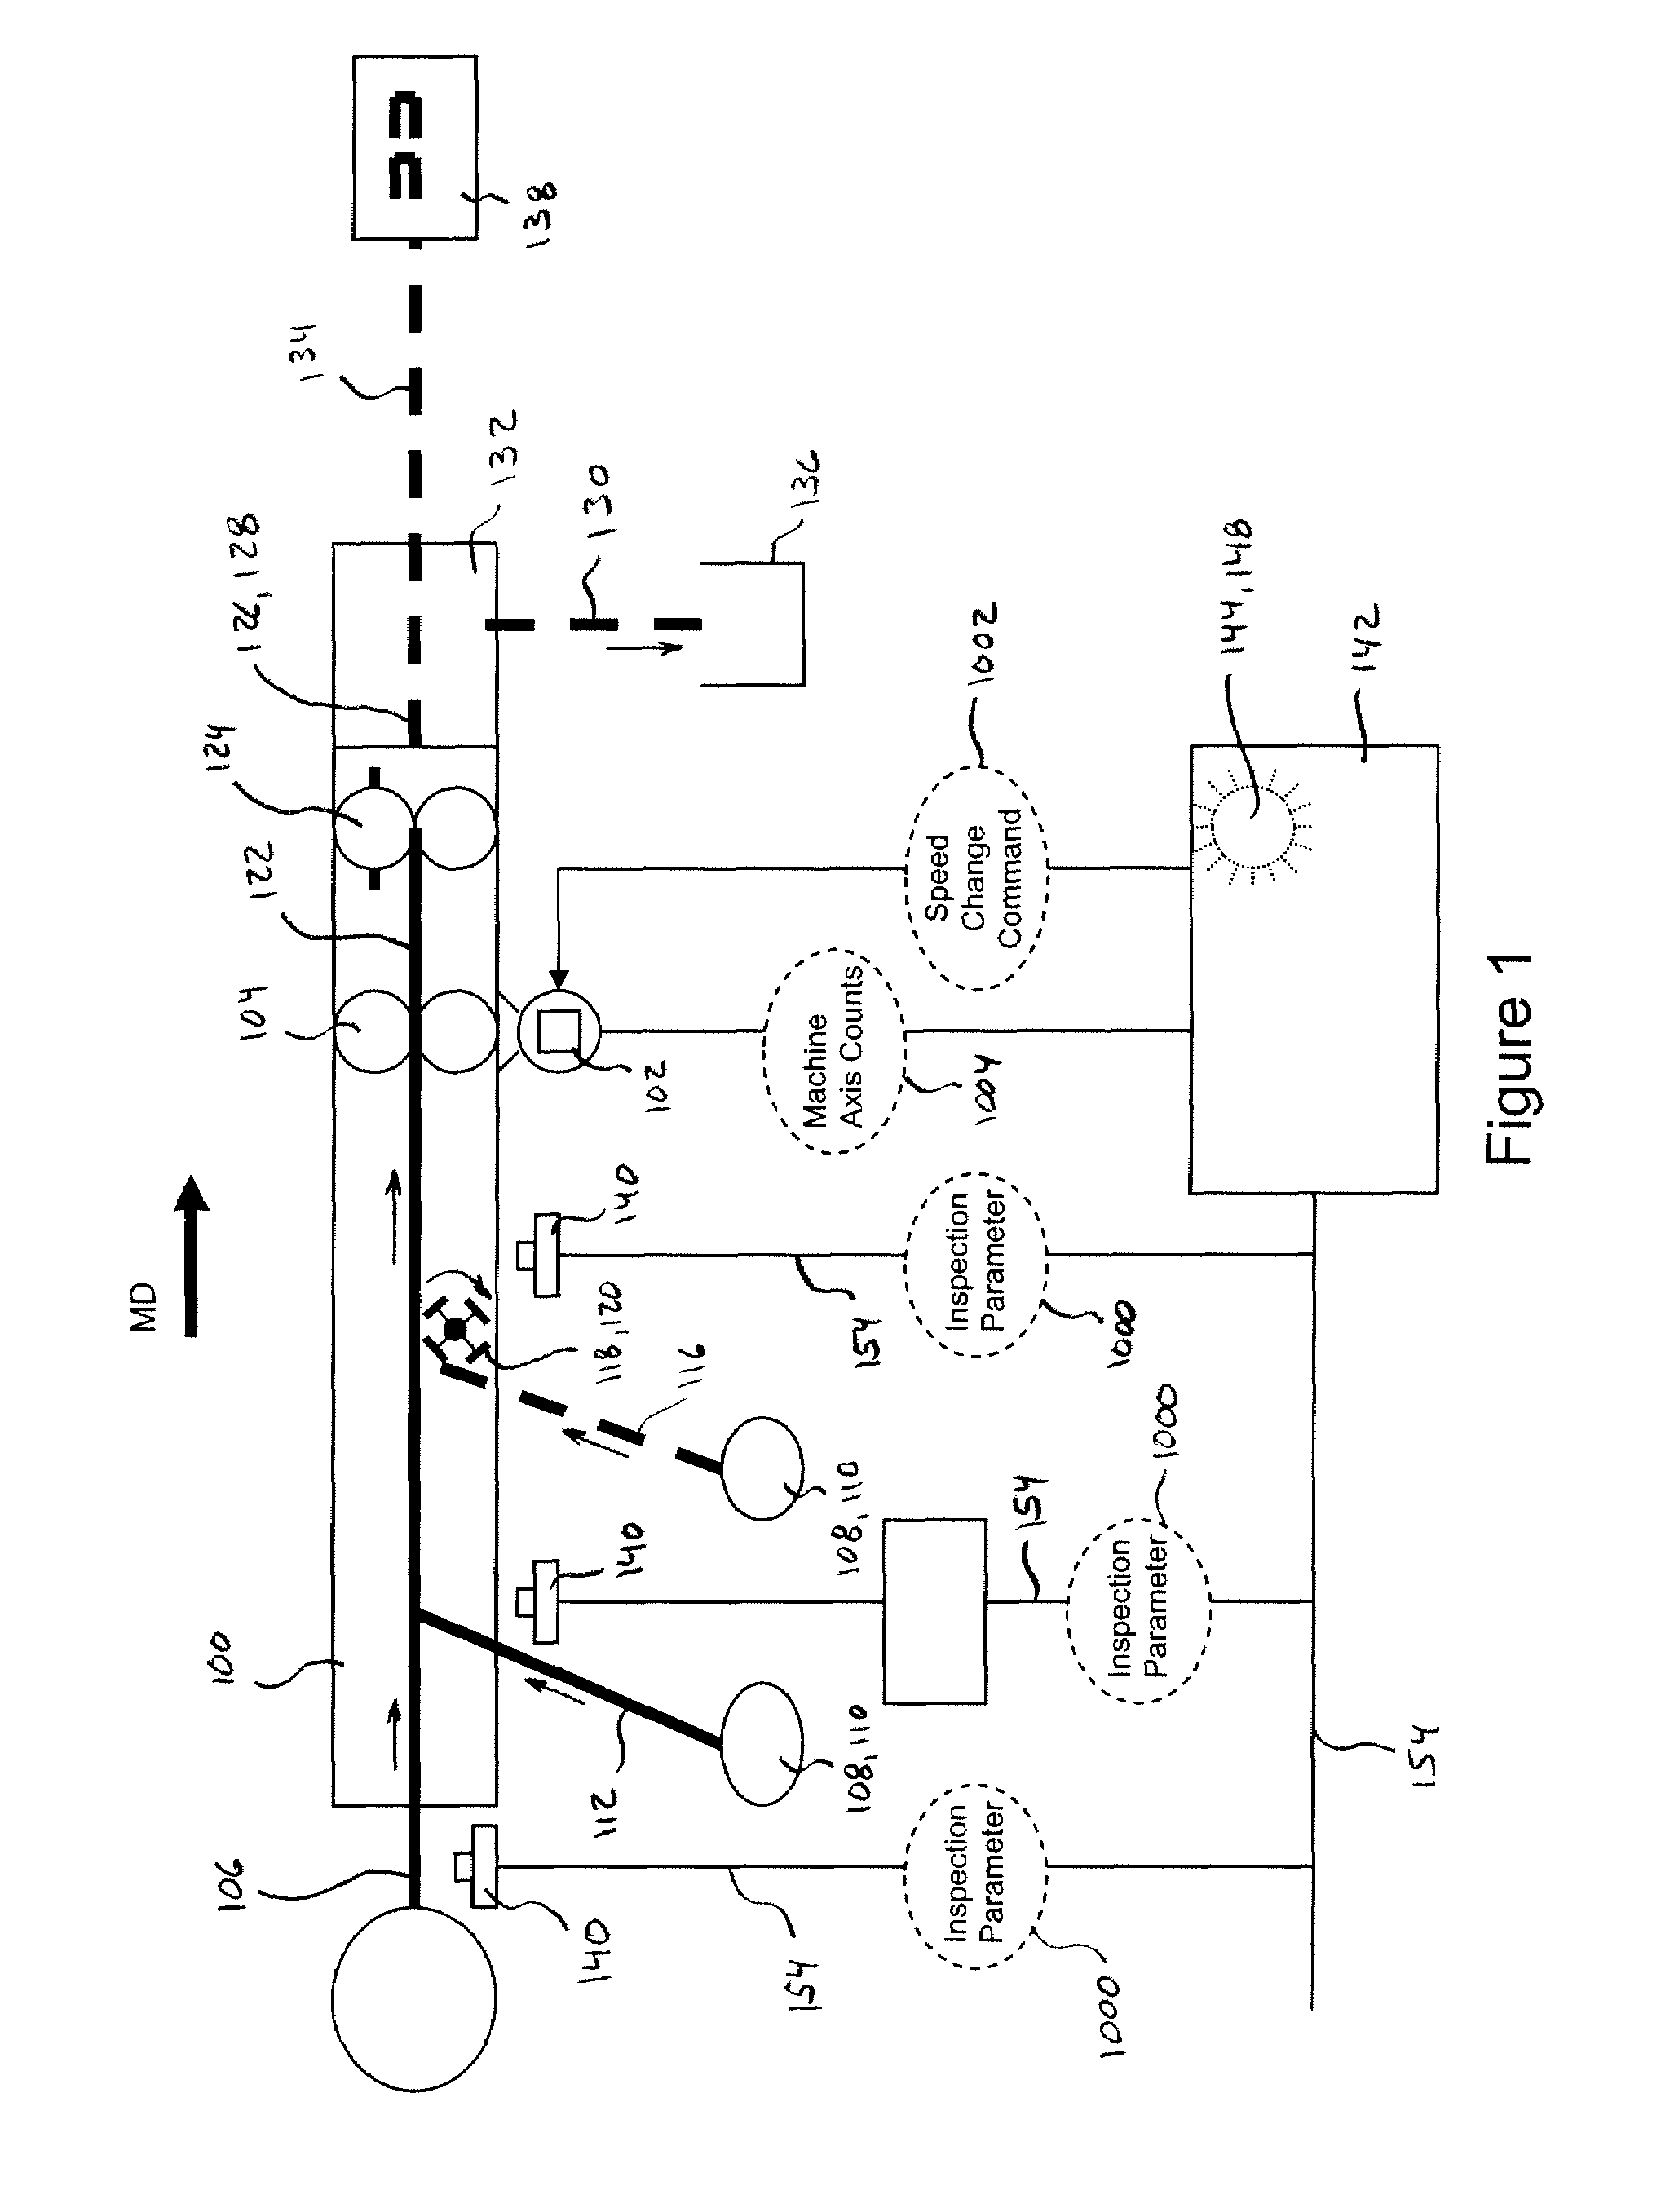 Systems and methods for controlling registration of advancing substrates in absorbent article converting lines